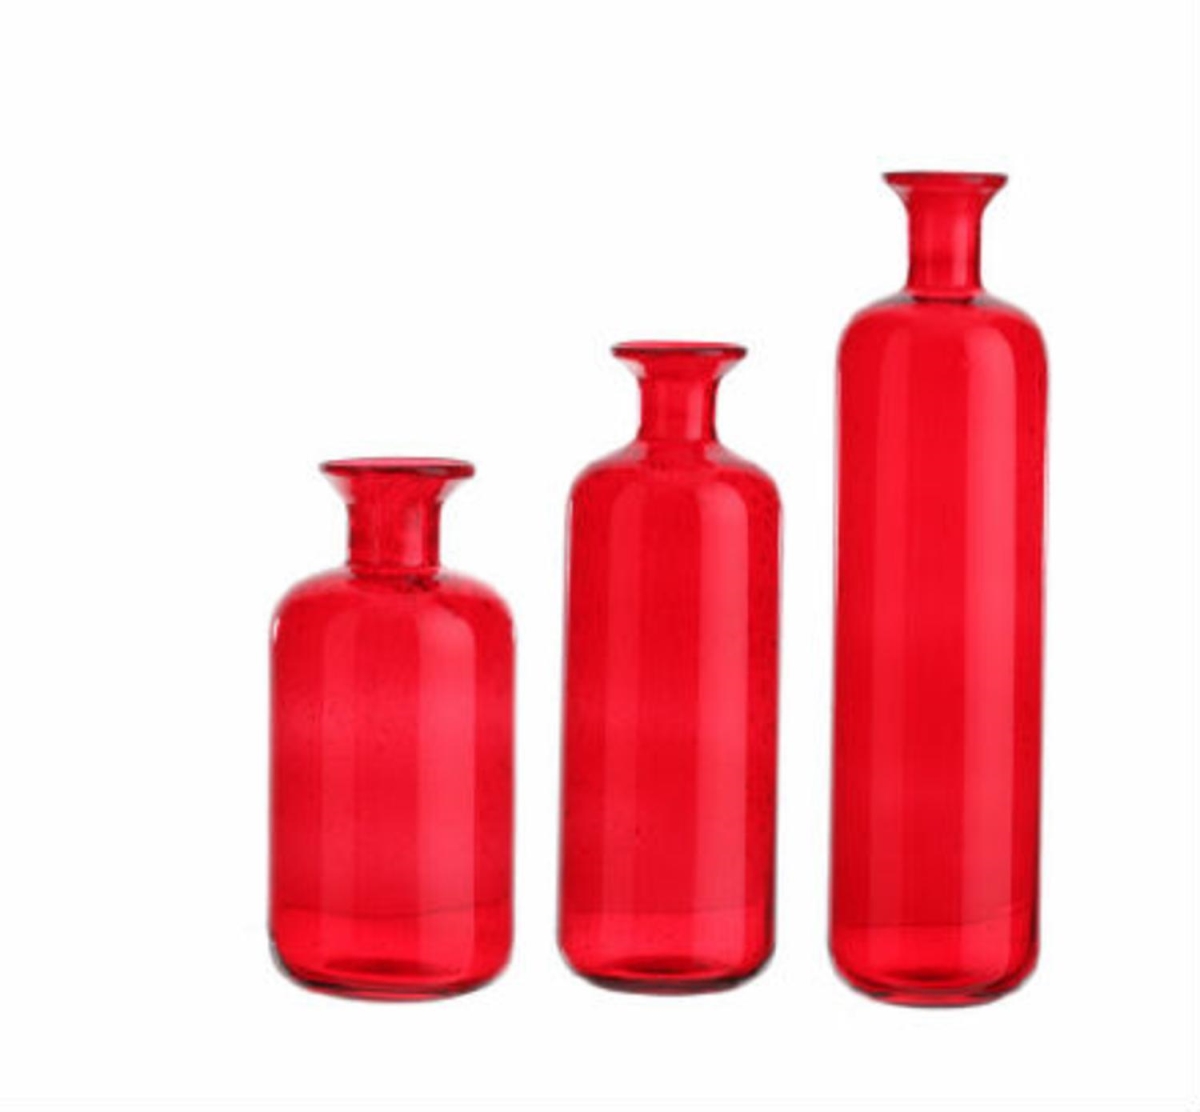 30790377 Translucent Candy Apple Red Decorative Glass Bottle, Set Of 3